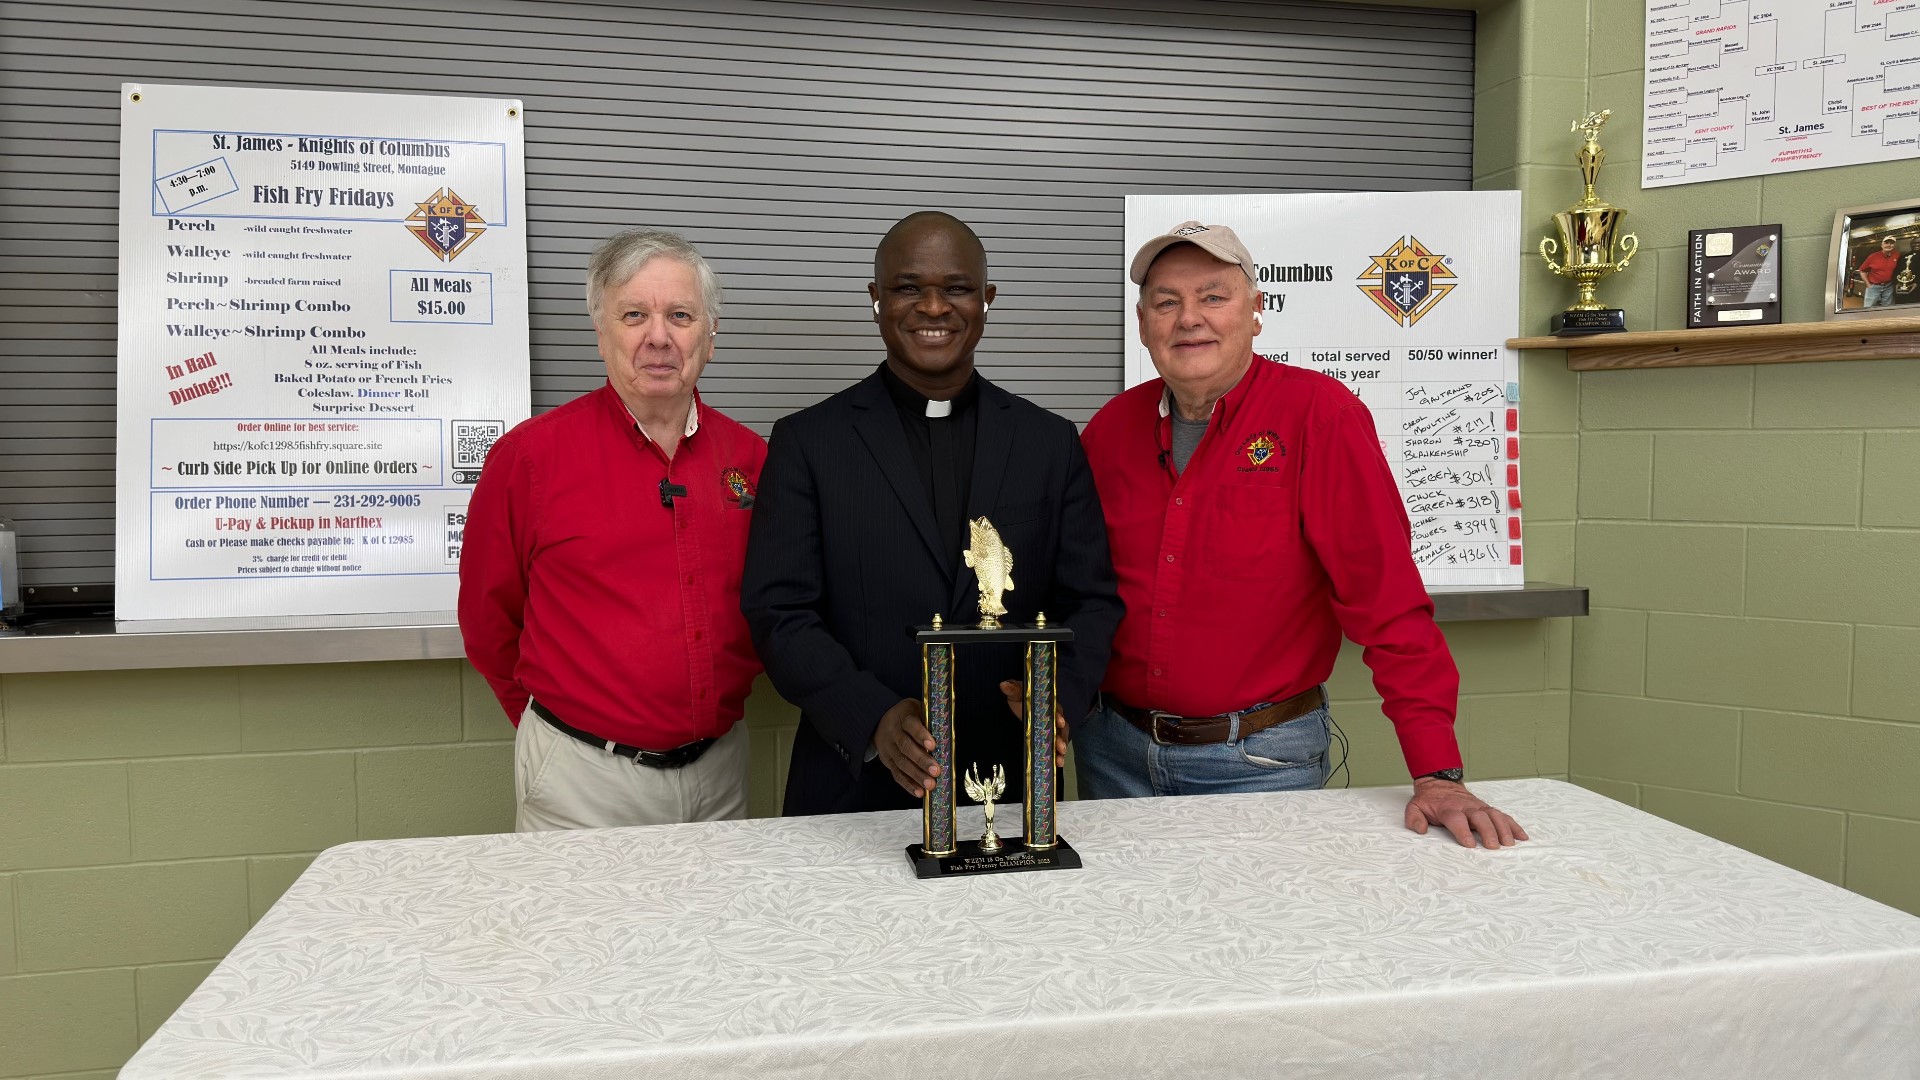 St. James Catholic Parish in Montague has won for the second time in three years.